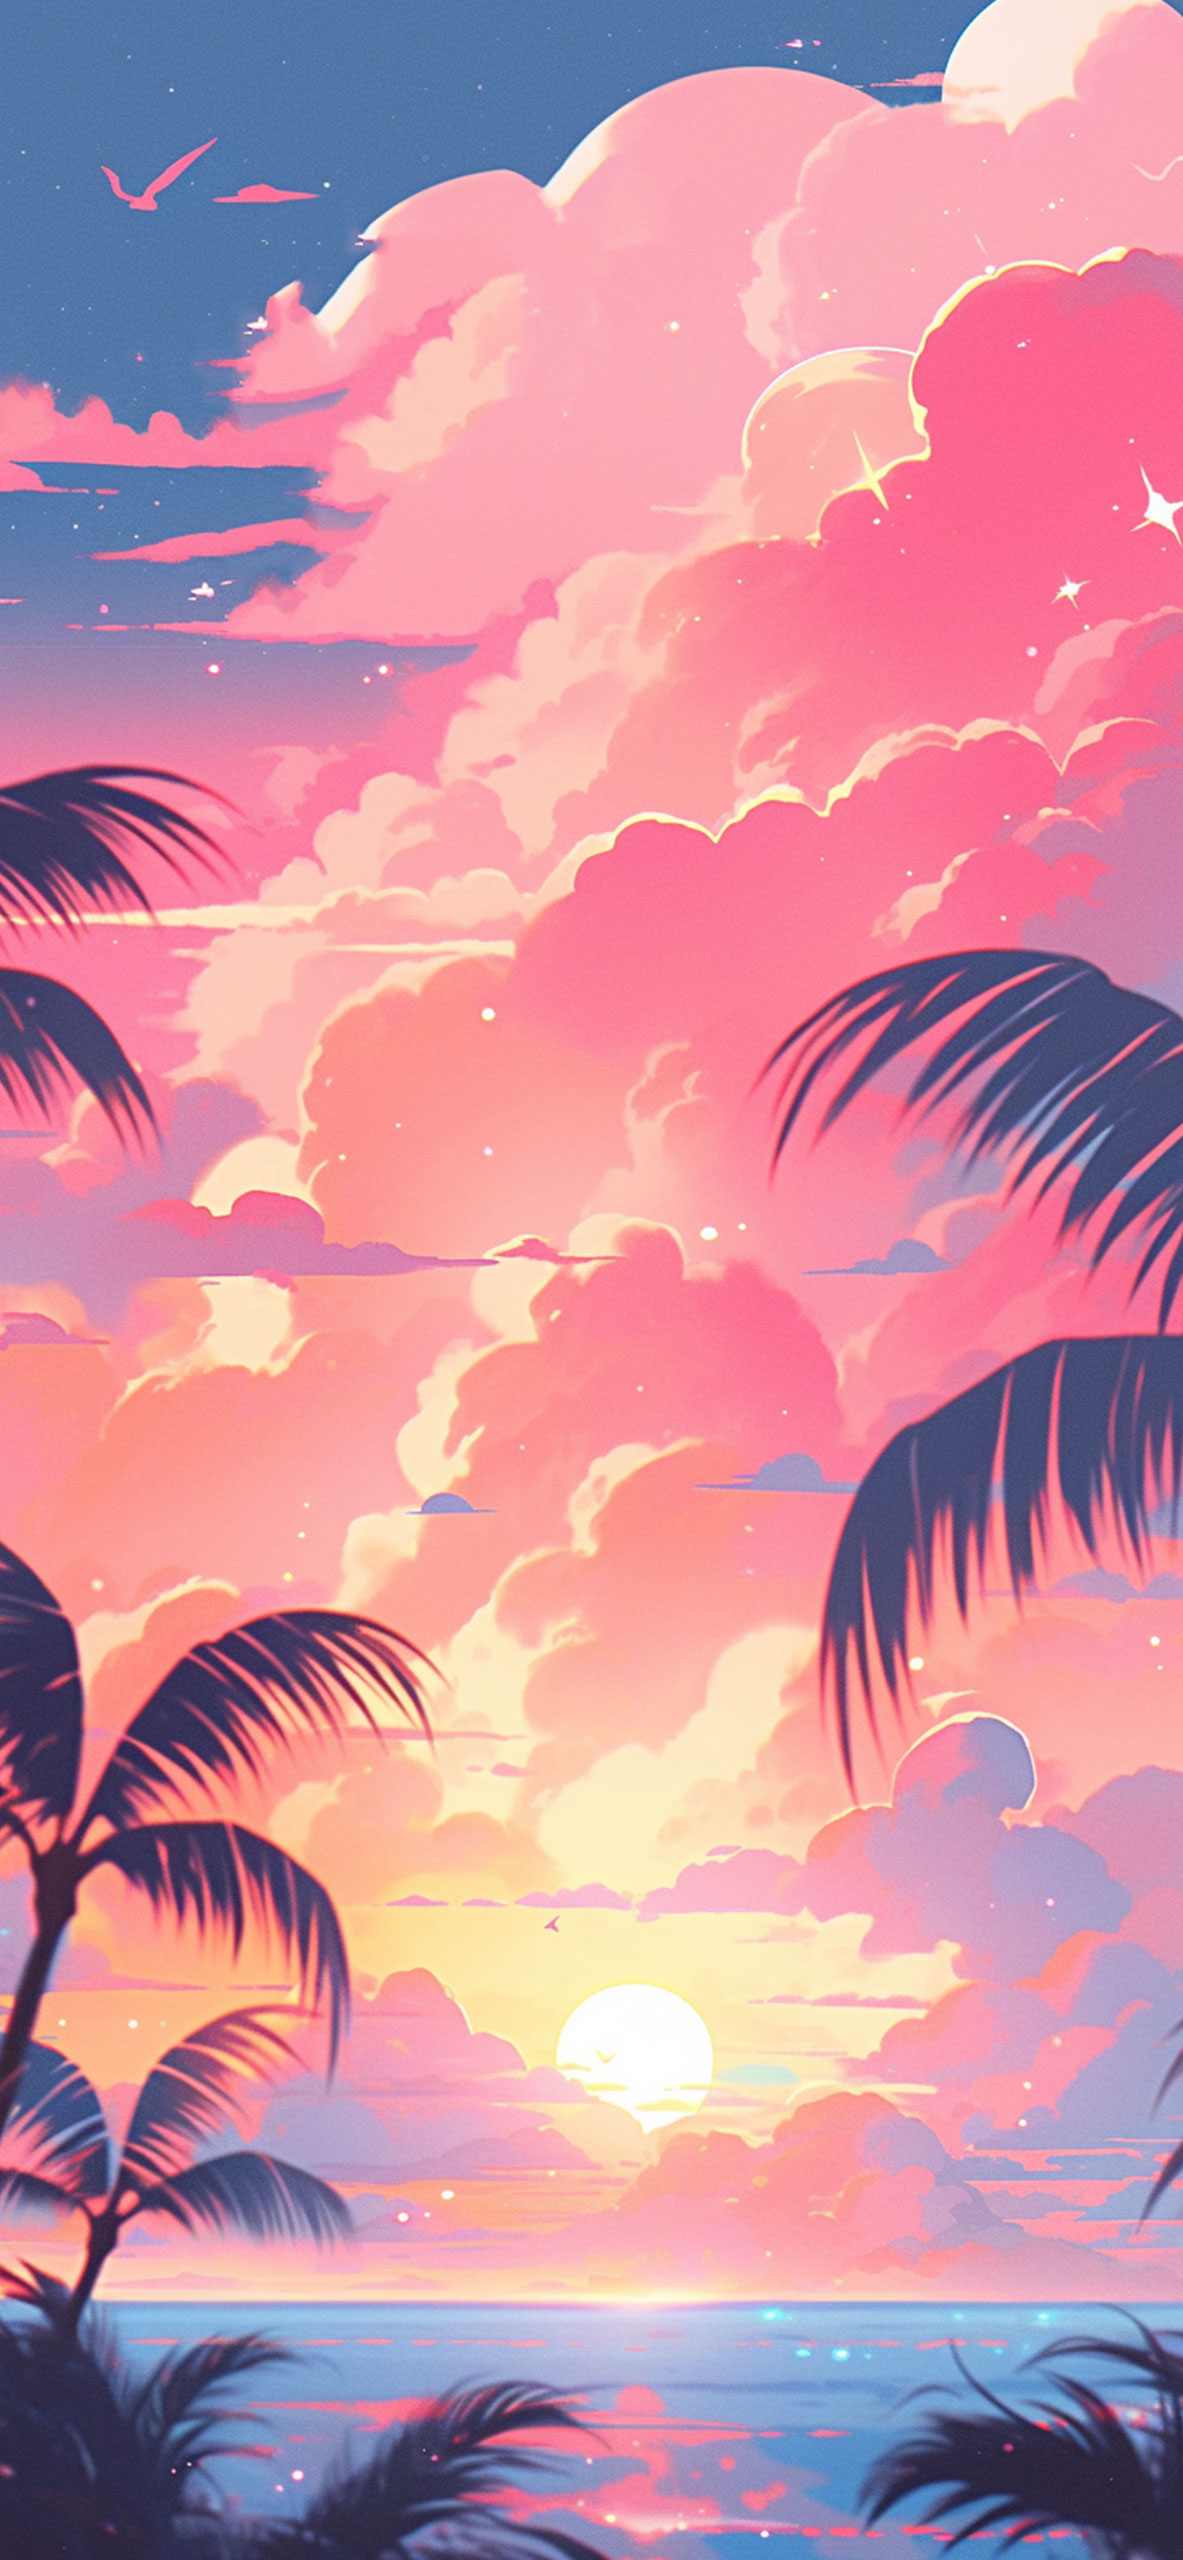 Palm Trees & Pink Clouds Summer Wallpaper Pink Clouds Wallpape